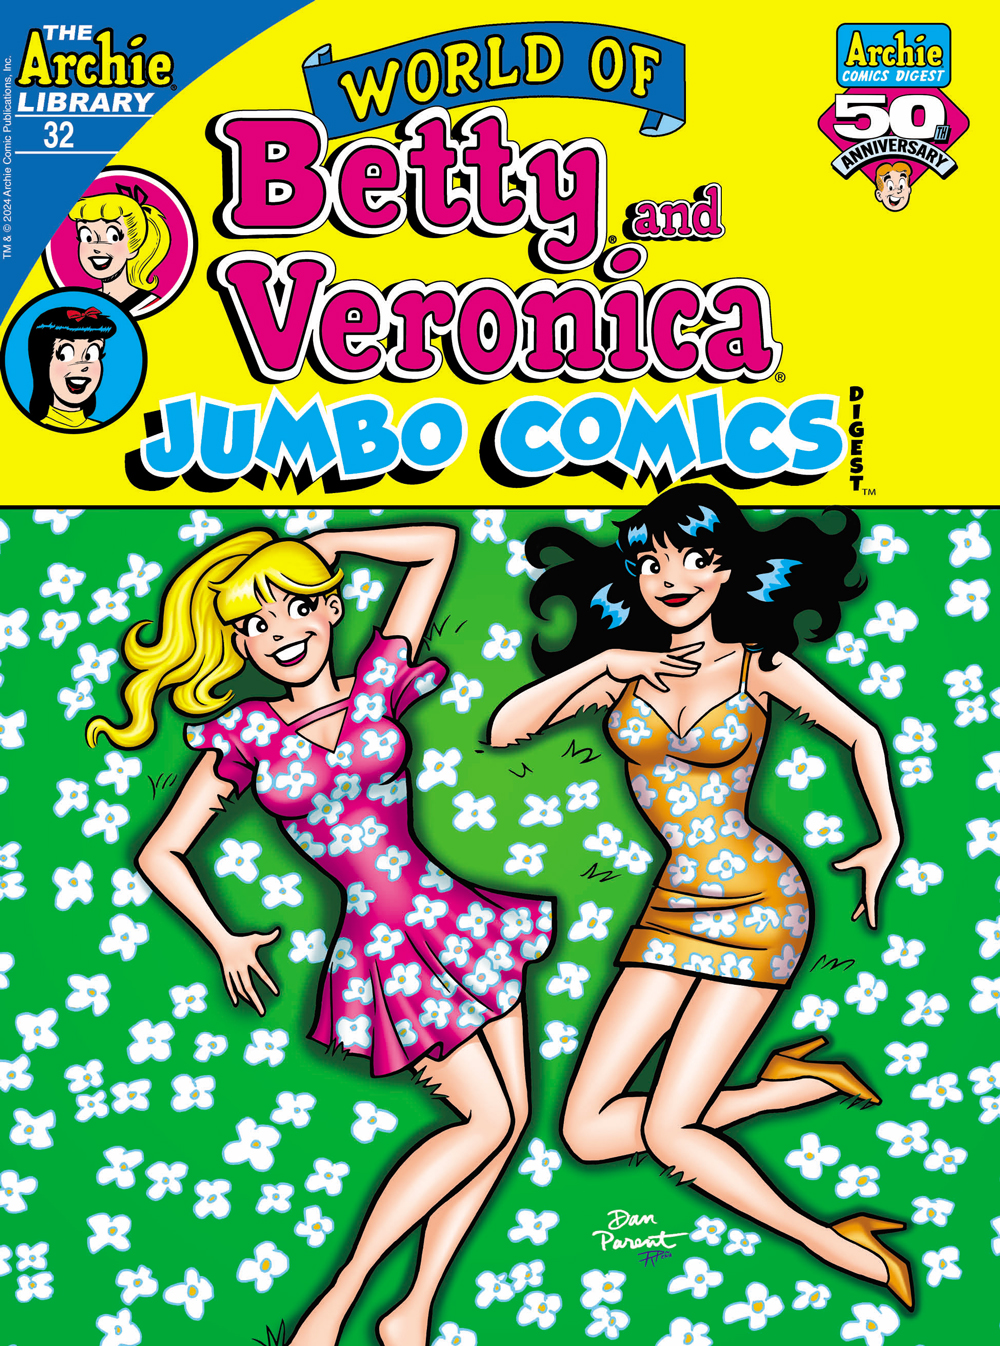 Betty and Veronica lay in a field of flowers while wearing flower print dresses.